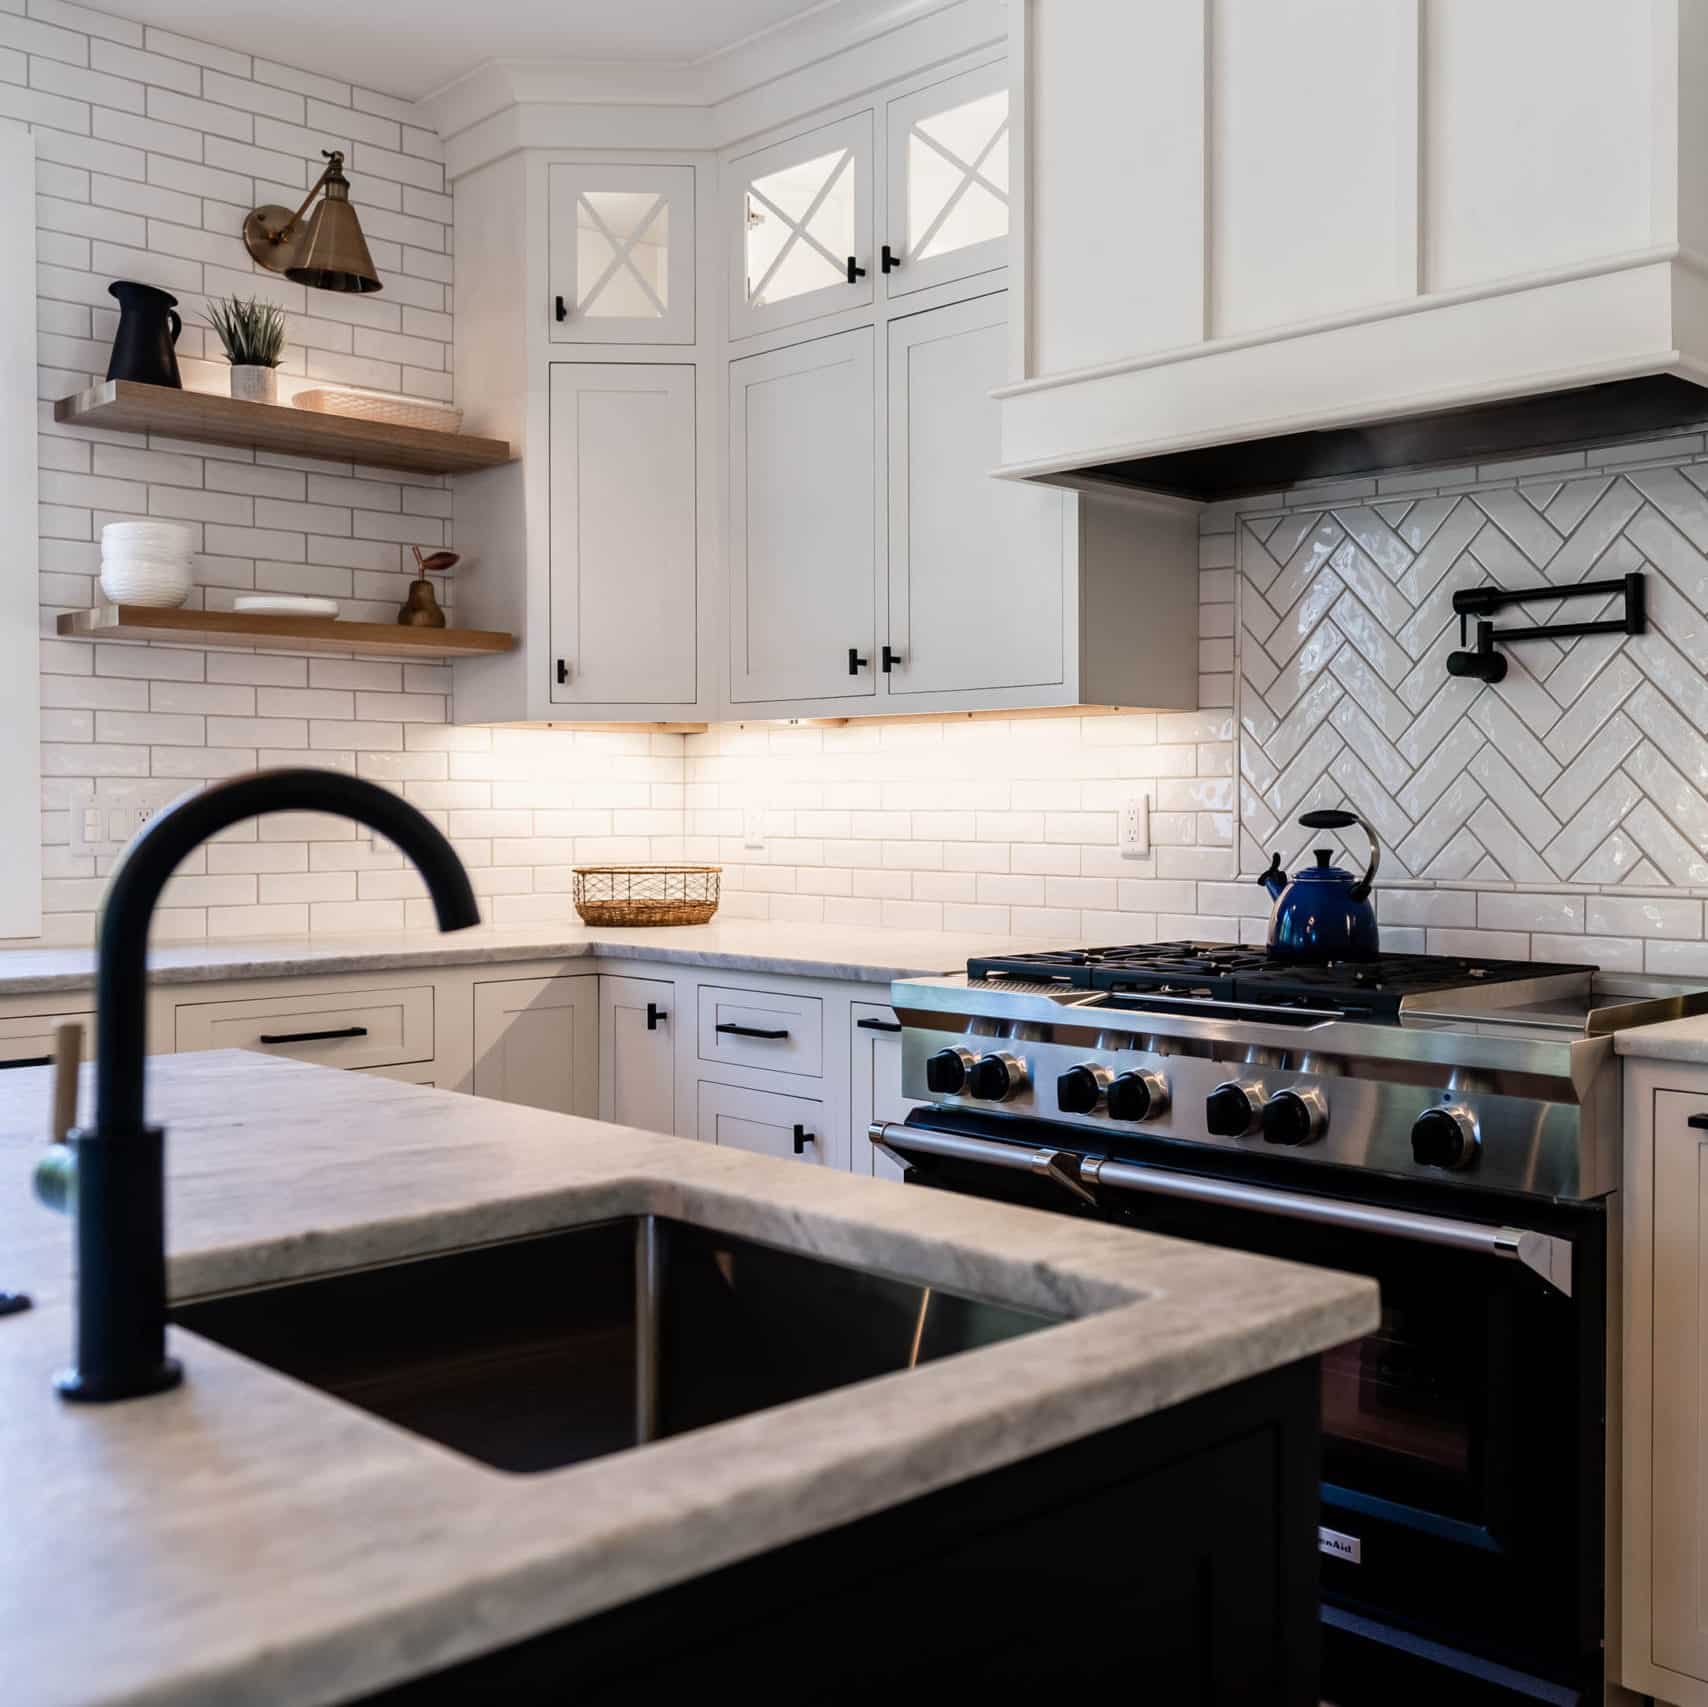 Corner of a kitchen. The cabinets are white with black hardware, and set against subway tile in both standard and herringbone patterns.